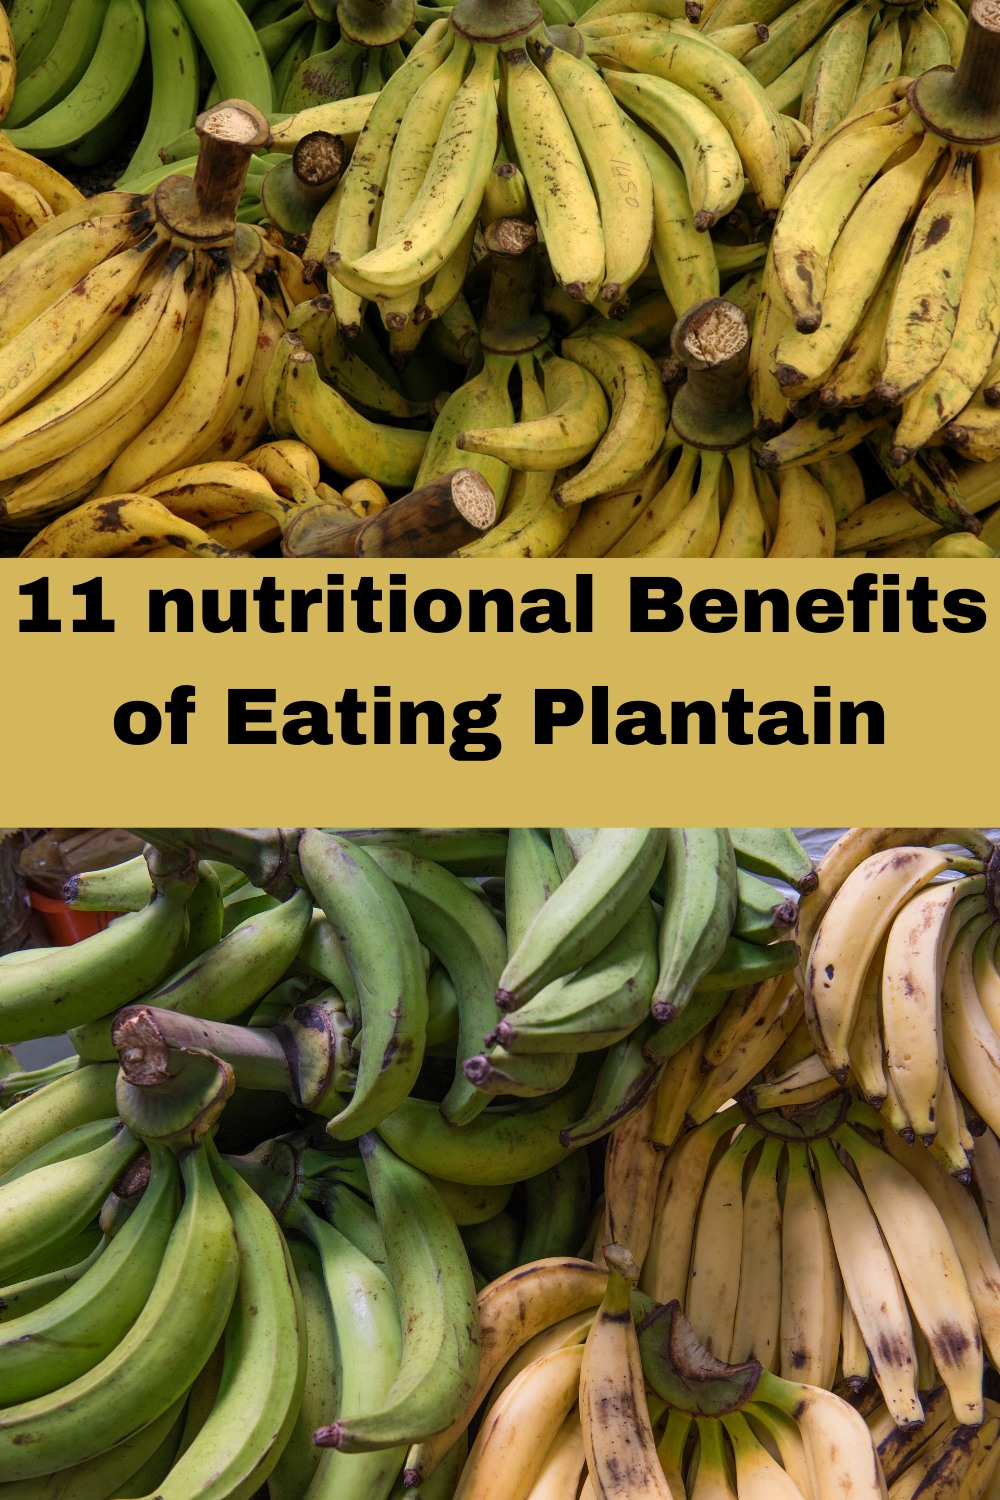 Nutritional Value And Benefits of Eating Of Plantain